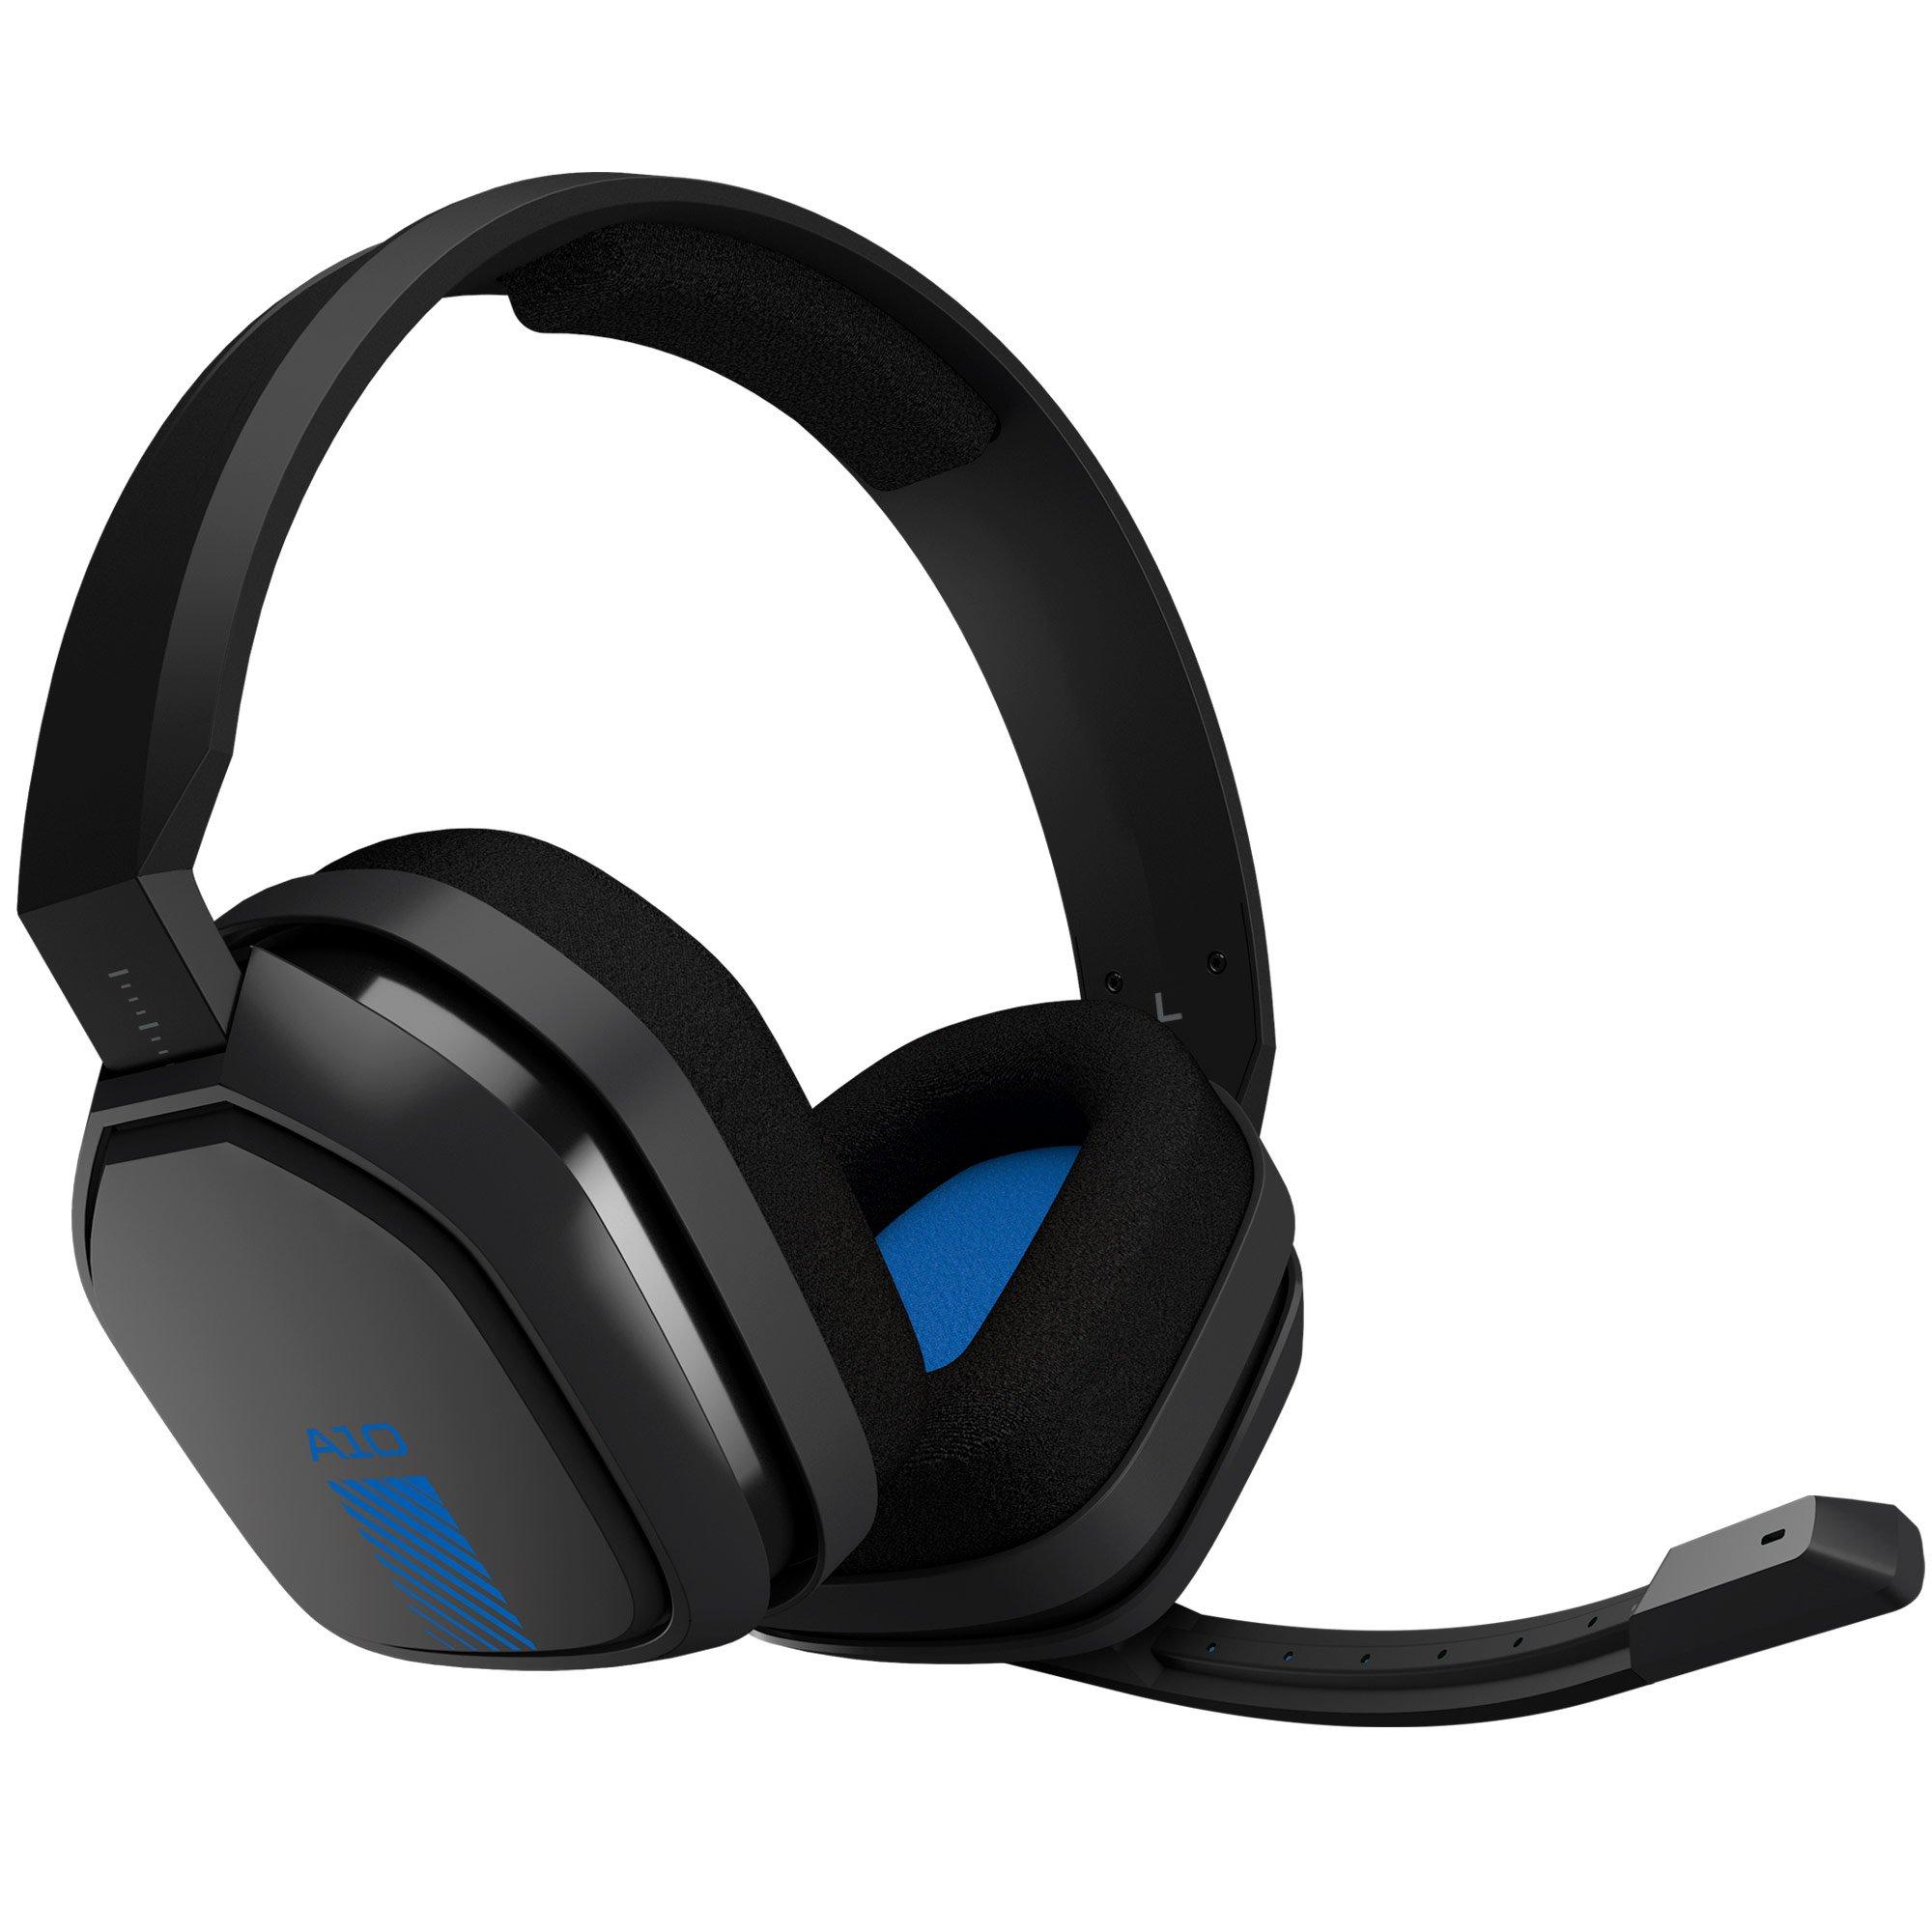 how much is a playstation headset